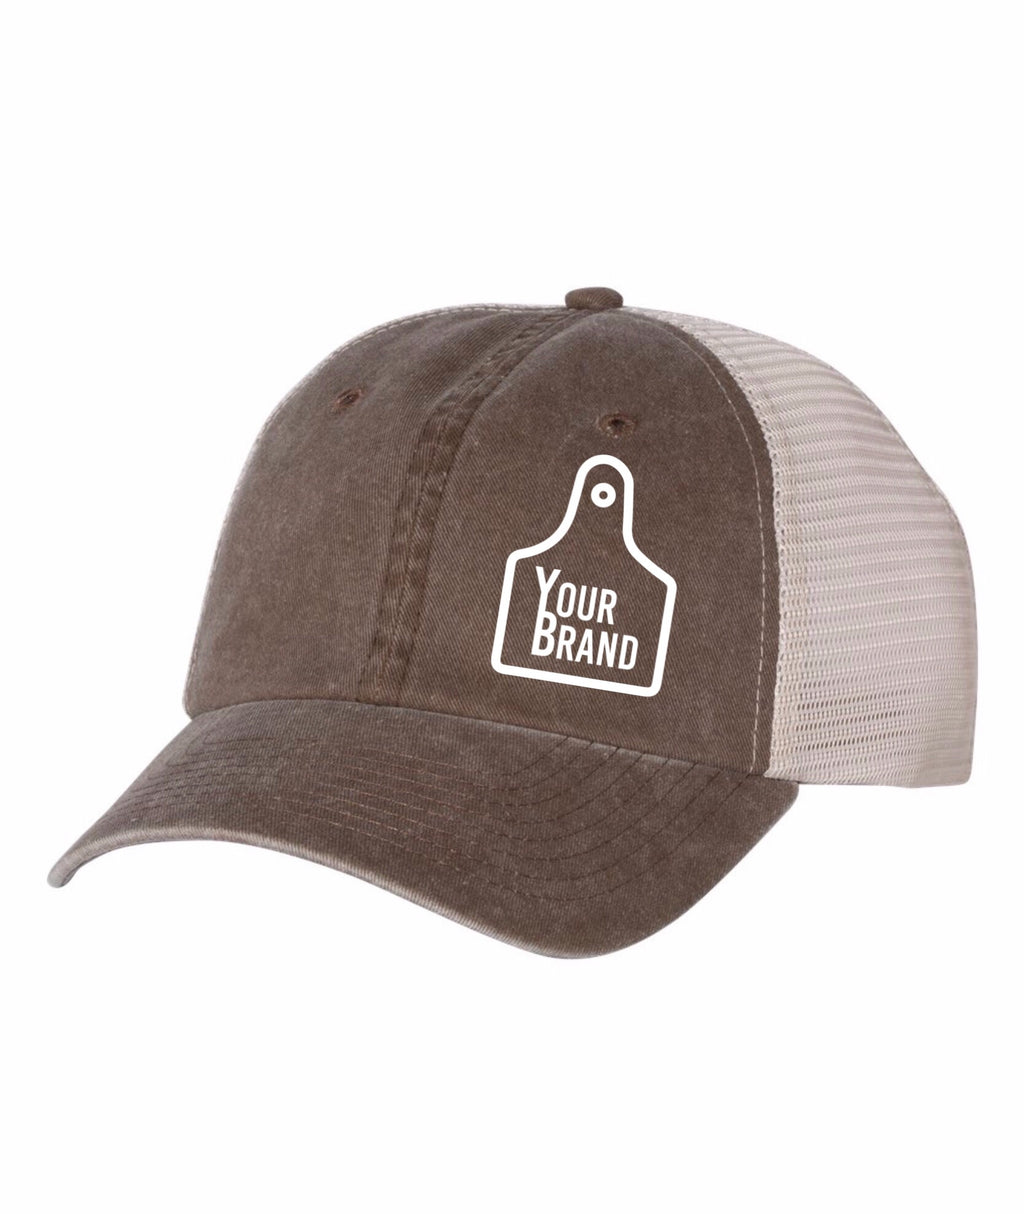 Cow Tag Sportsman Pigment Dyed Hat